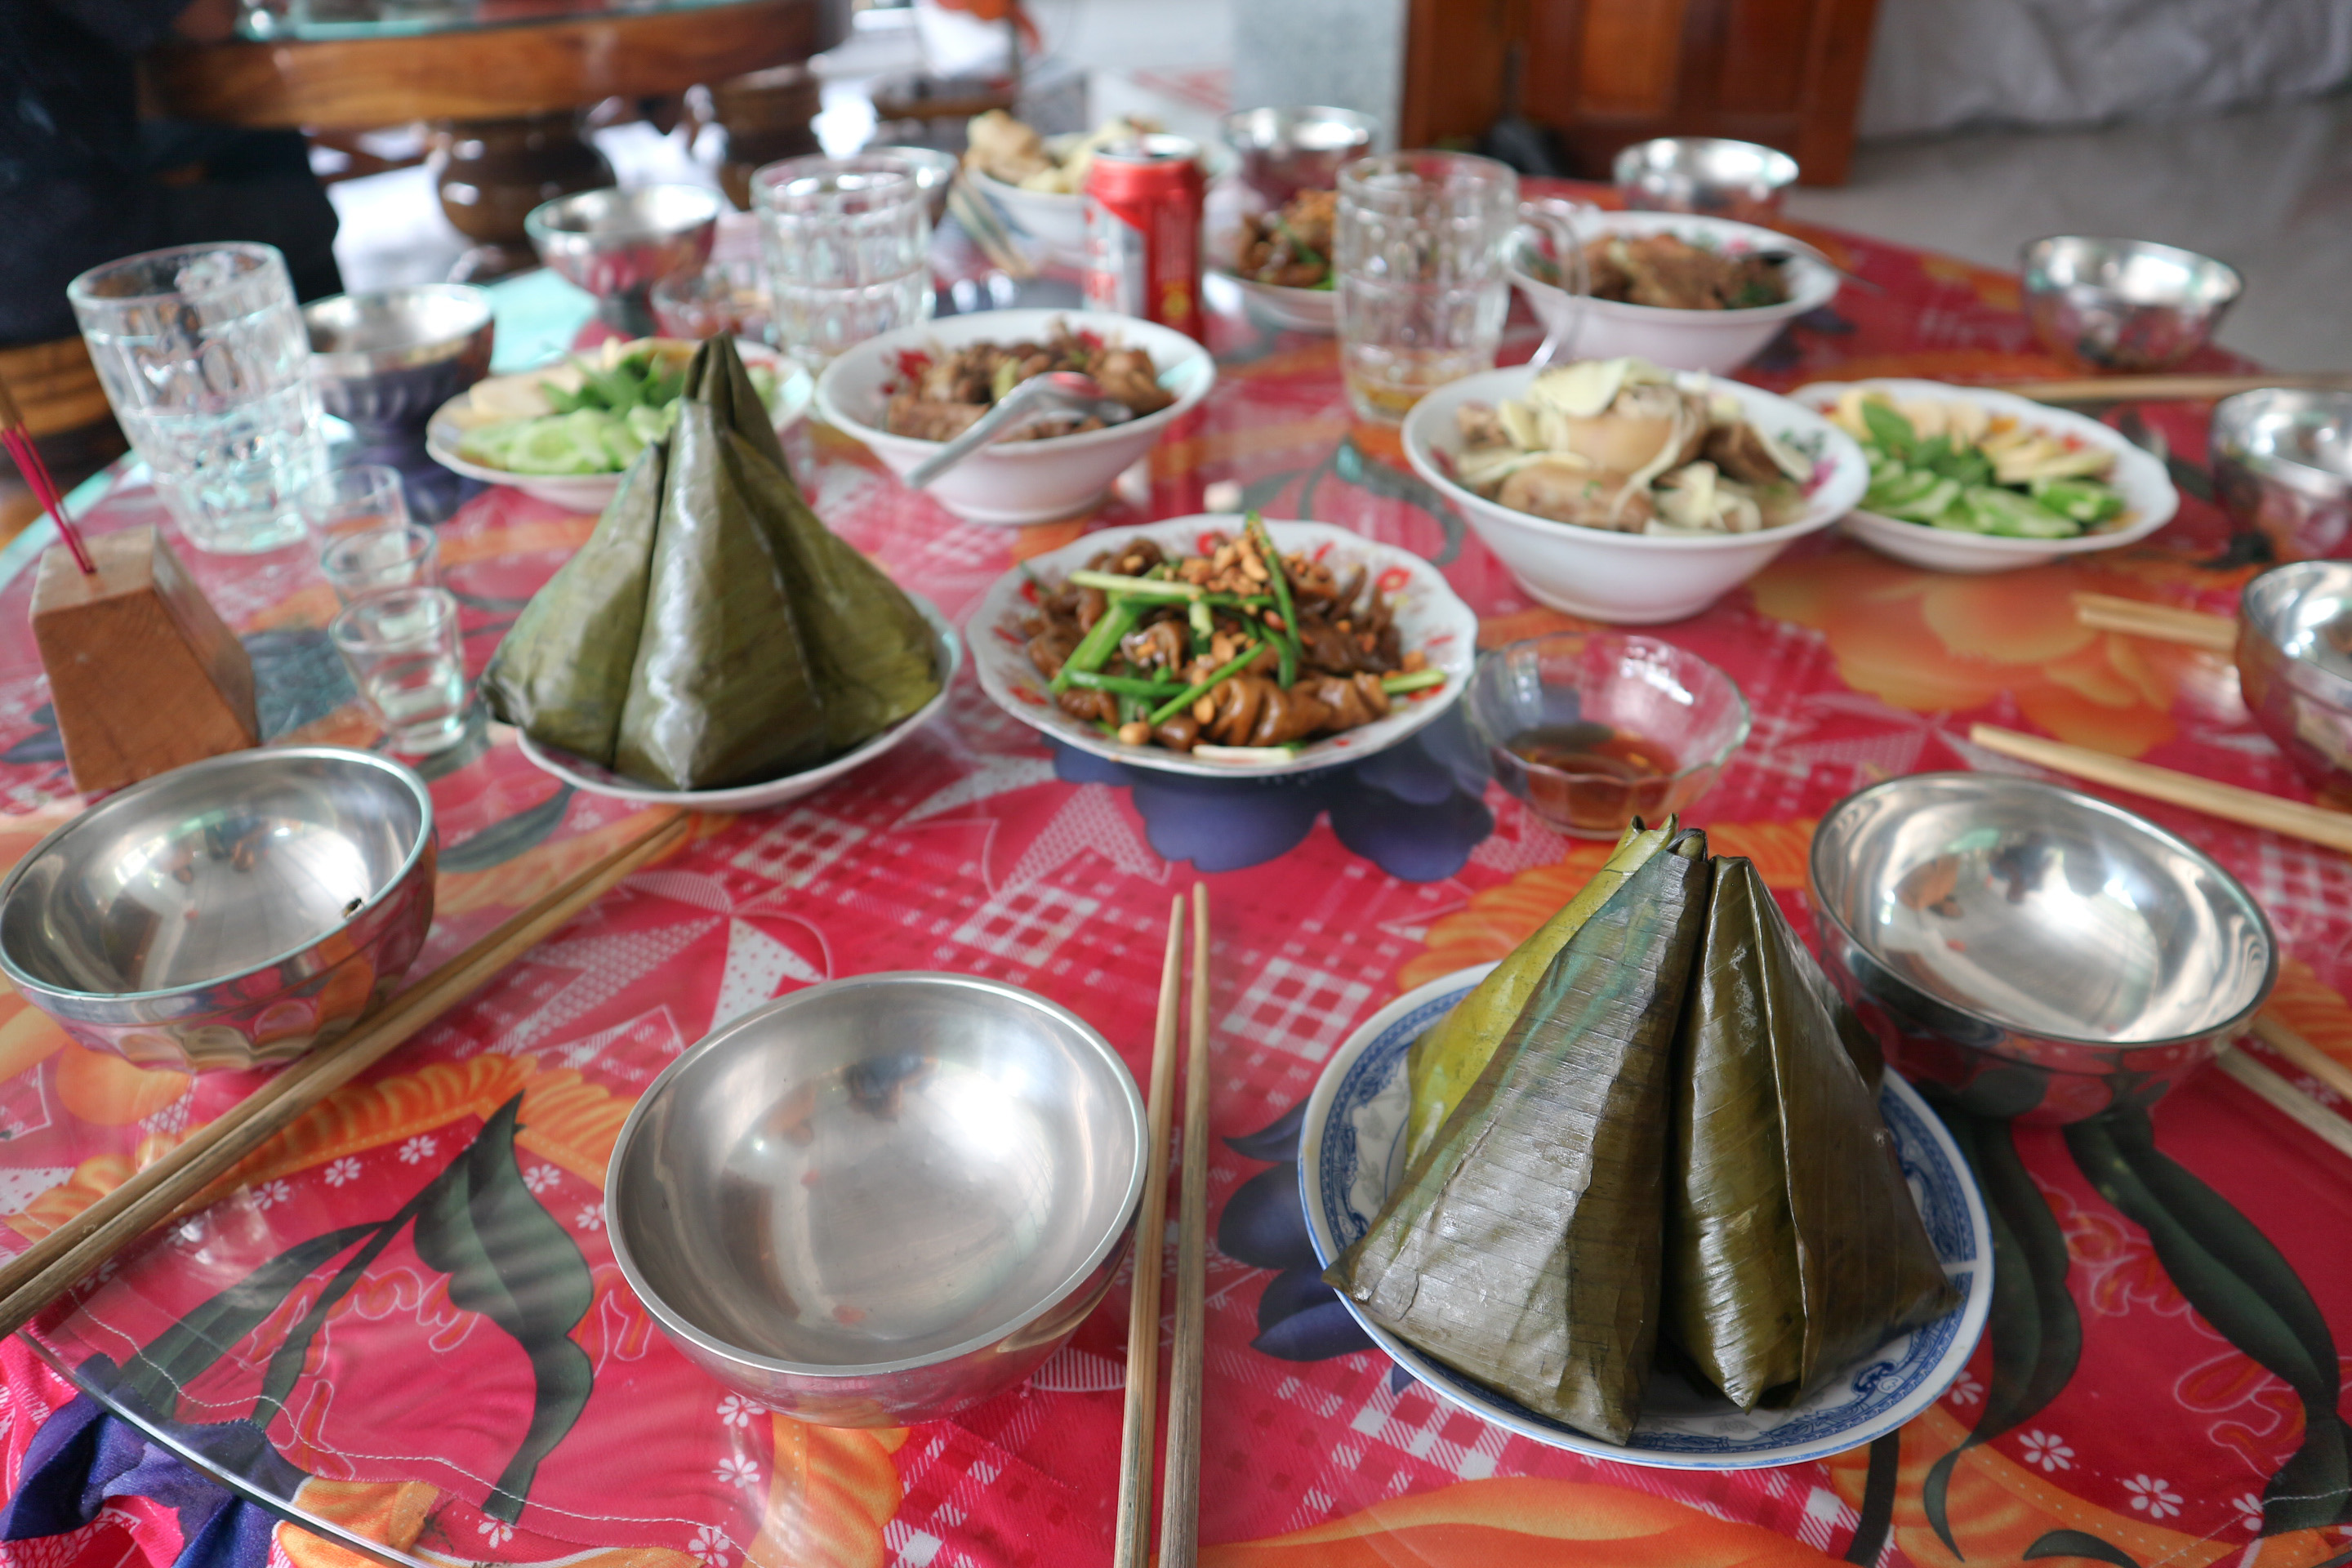 'Banh it' is served as an offering during death anniversarys at Nguyen Thi Kim Lan’s family at My Ngai Communes, Cao Lanh City, Dong Thap Province. Photo: Ngoc Phuong / Tuoi Tre News